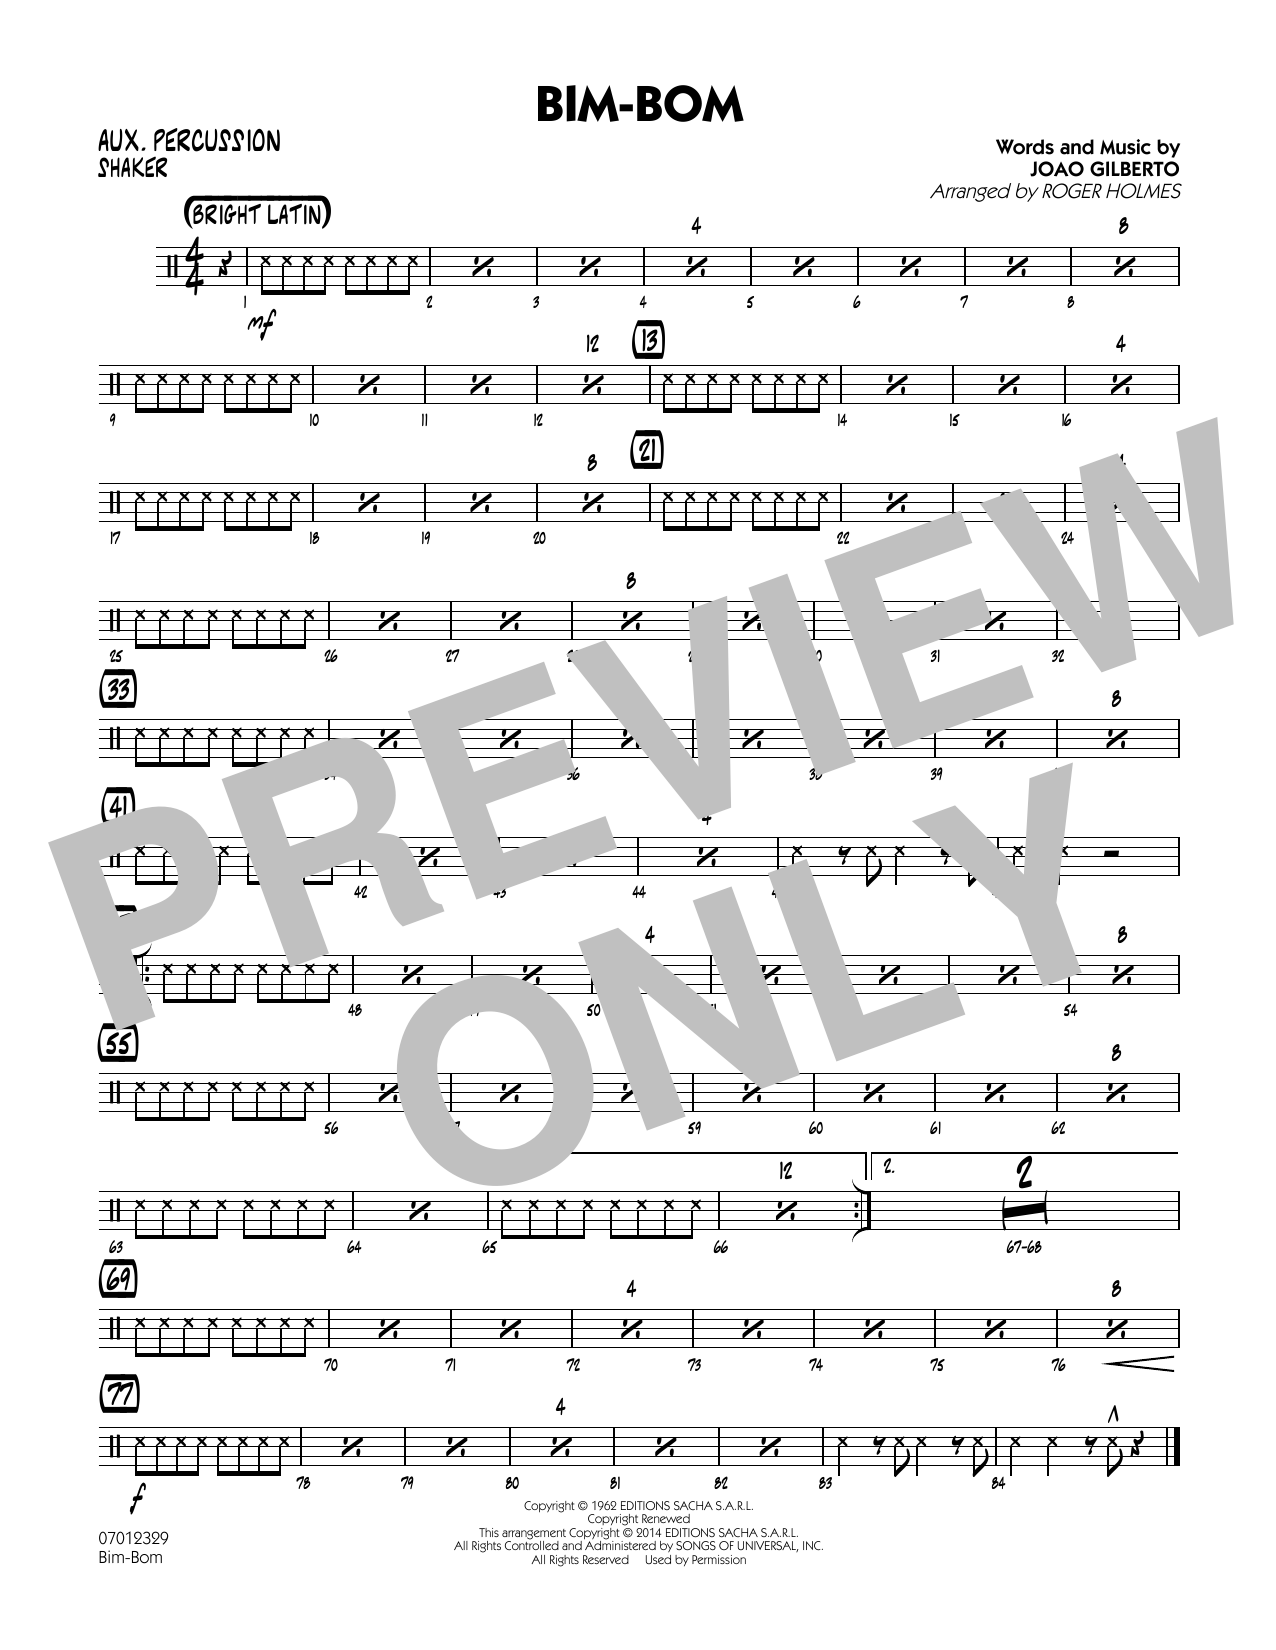 Roger Holmes Bim-Bom - Aux Percussion sheet music notes and chords. Download Printable PDF.